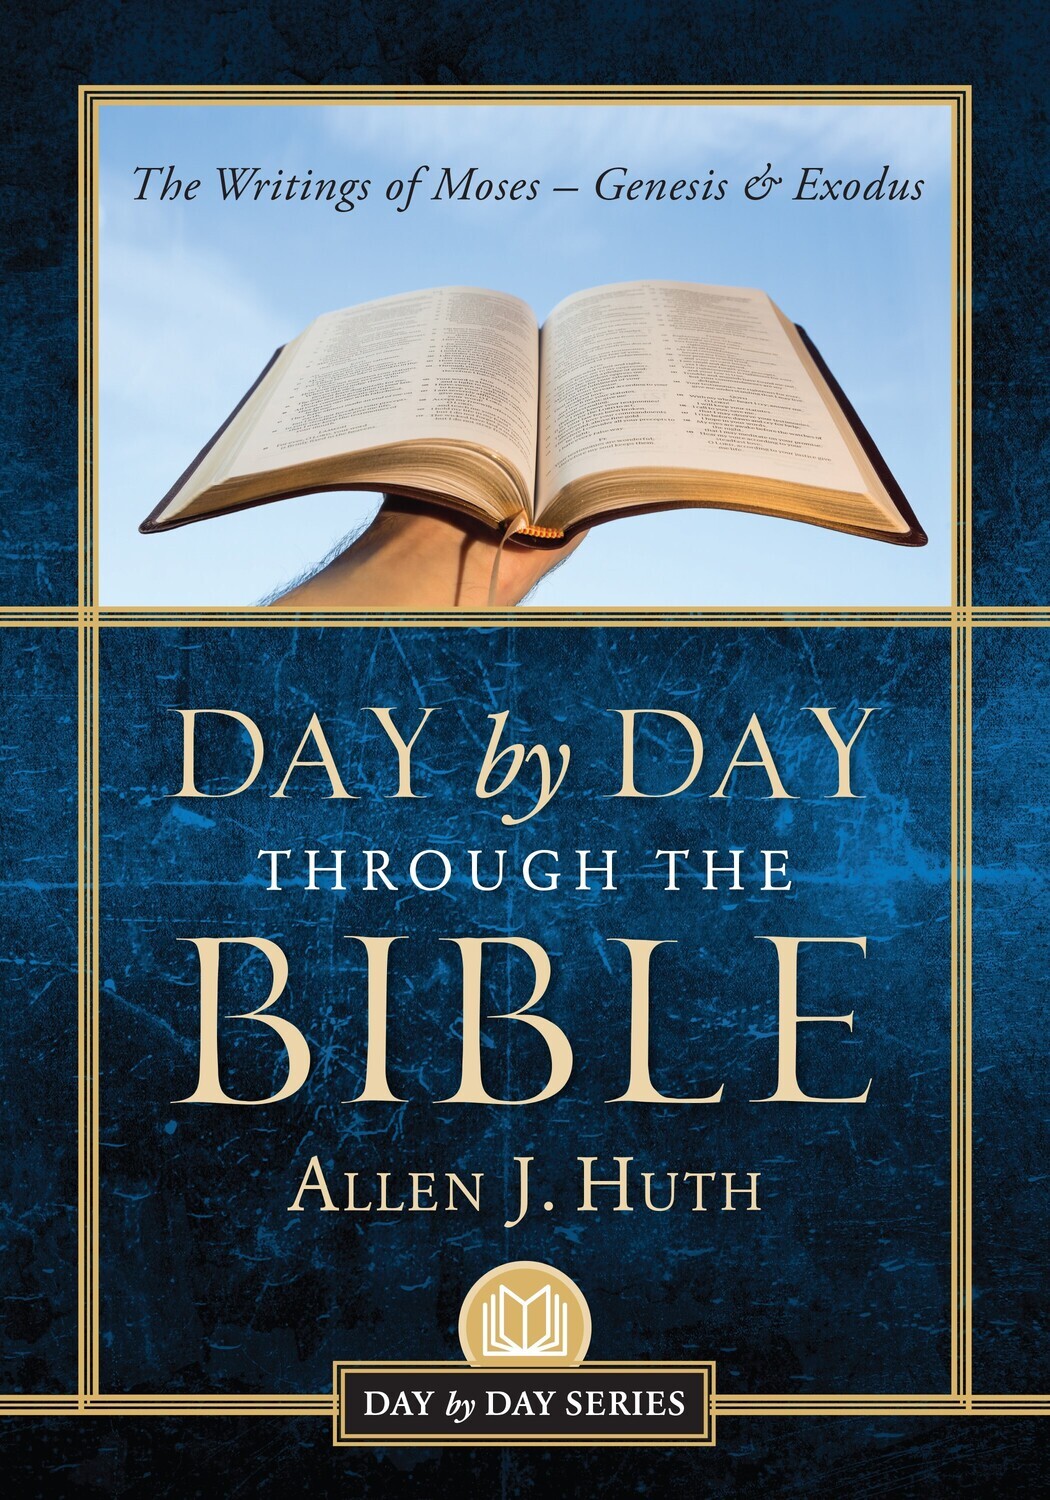 Day by Day Through the Bible: The Writings of Moses - Genesis & Moses